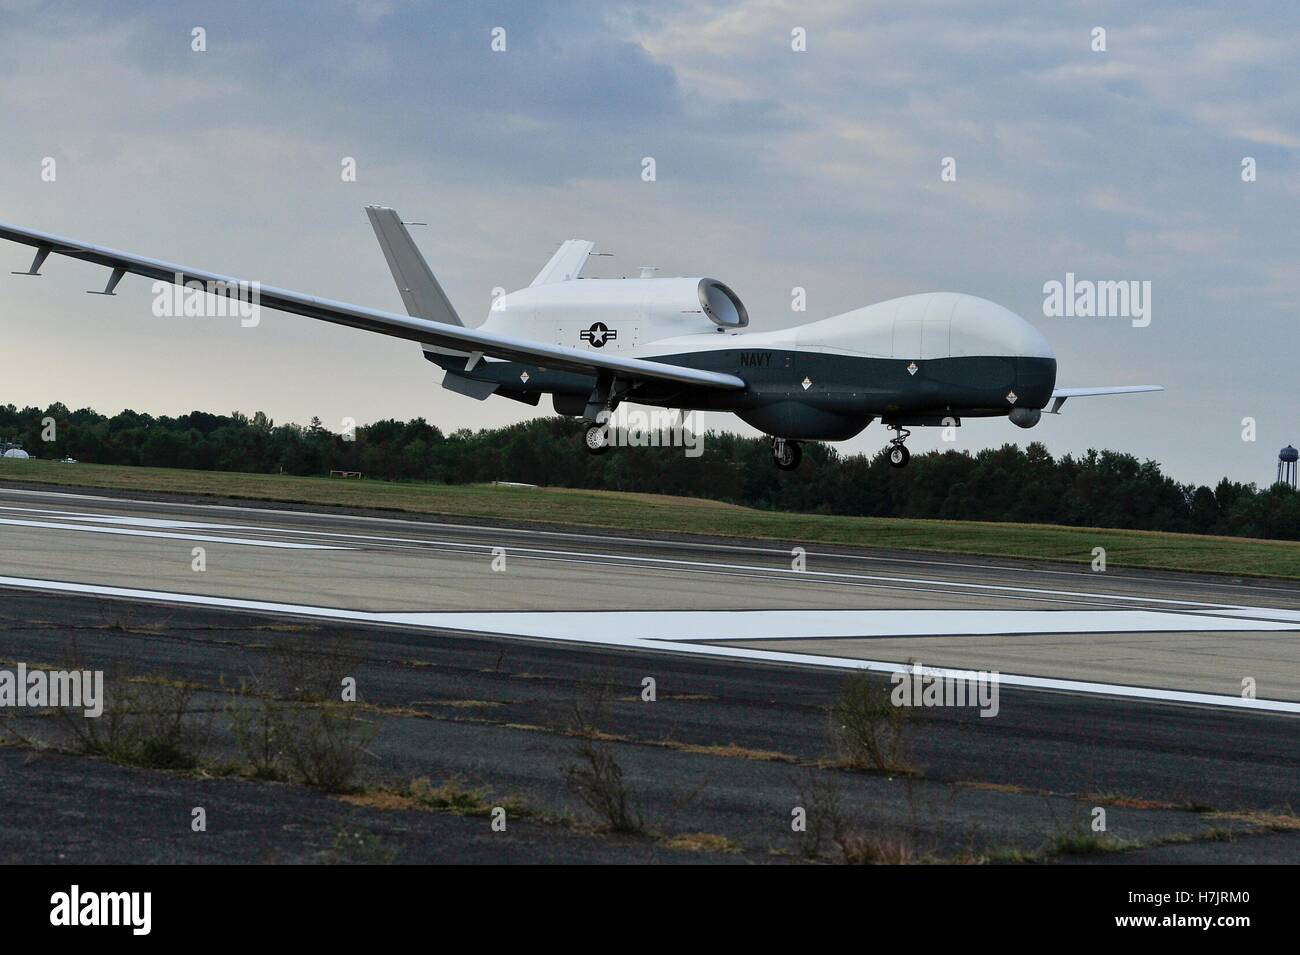 The MQ-4C Triton unmanned aircraft prepares to land on the runway at the Naval Air Station Patuxent River after completing its inaugural cross-country flight from California September 18, 2014 in Maryland. Stock Photo